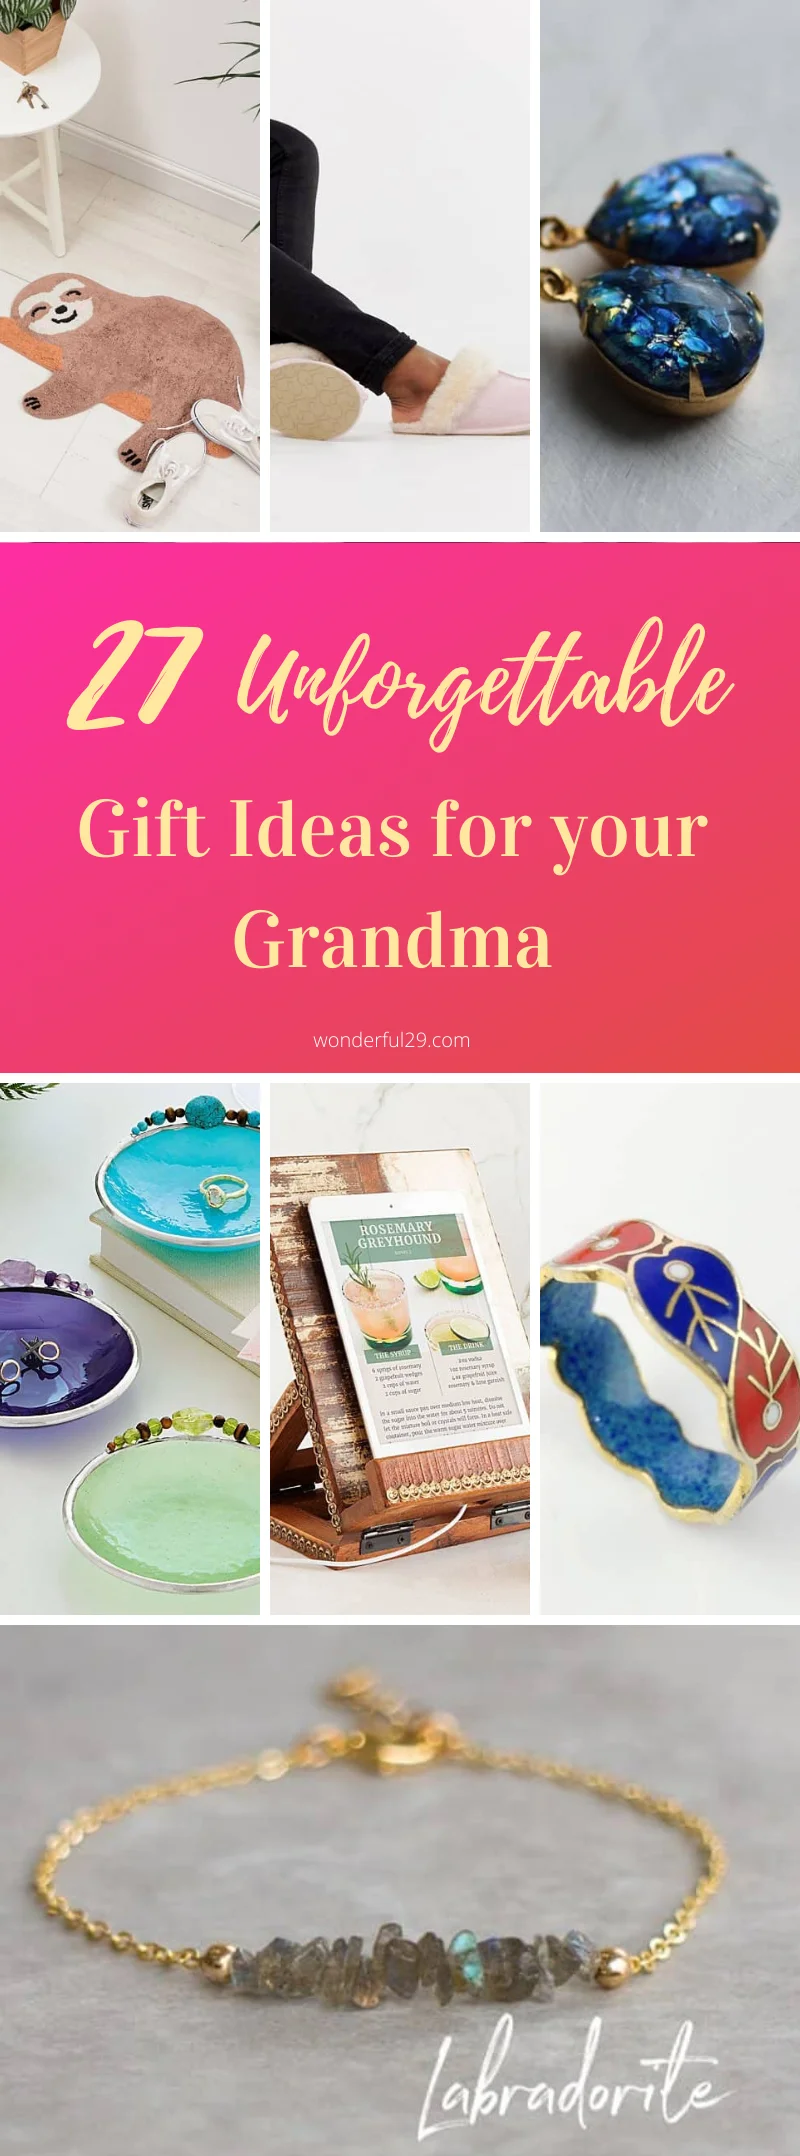 The Best Gifts for Grandparents - Studio DIY